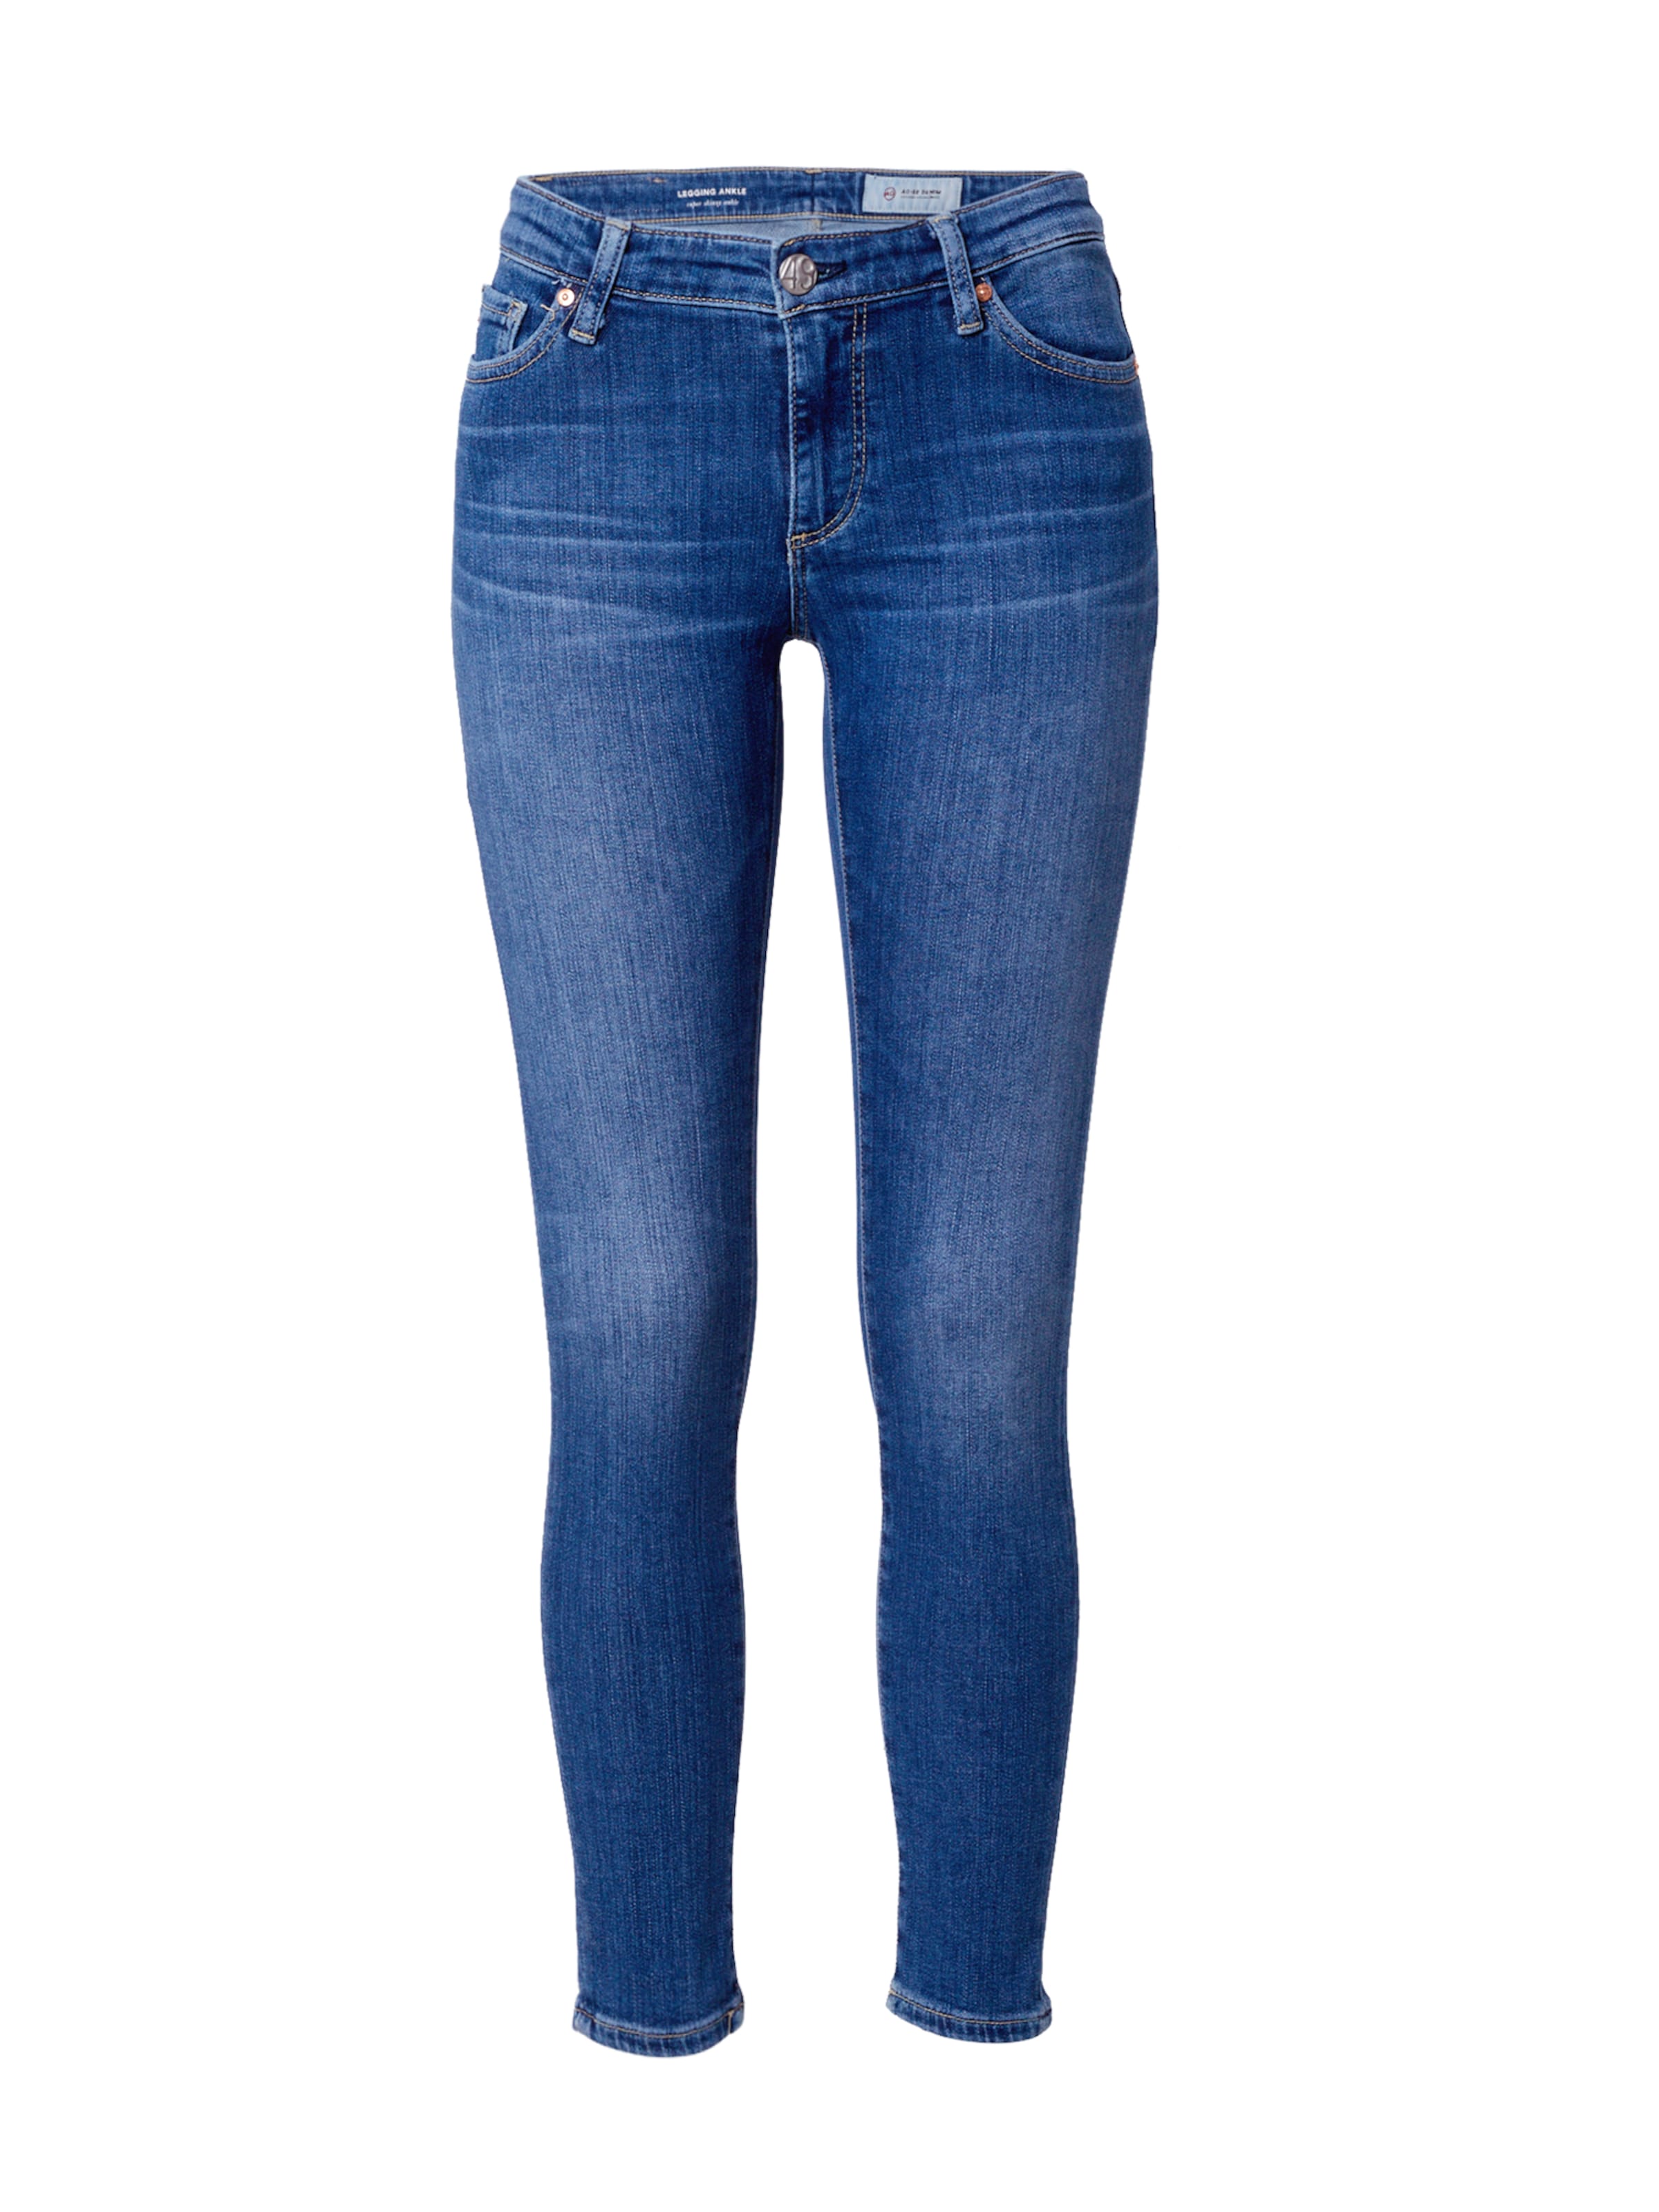 PROMO Donna AG Jeans Jeans in Blu 